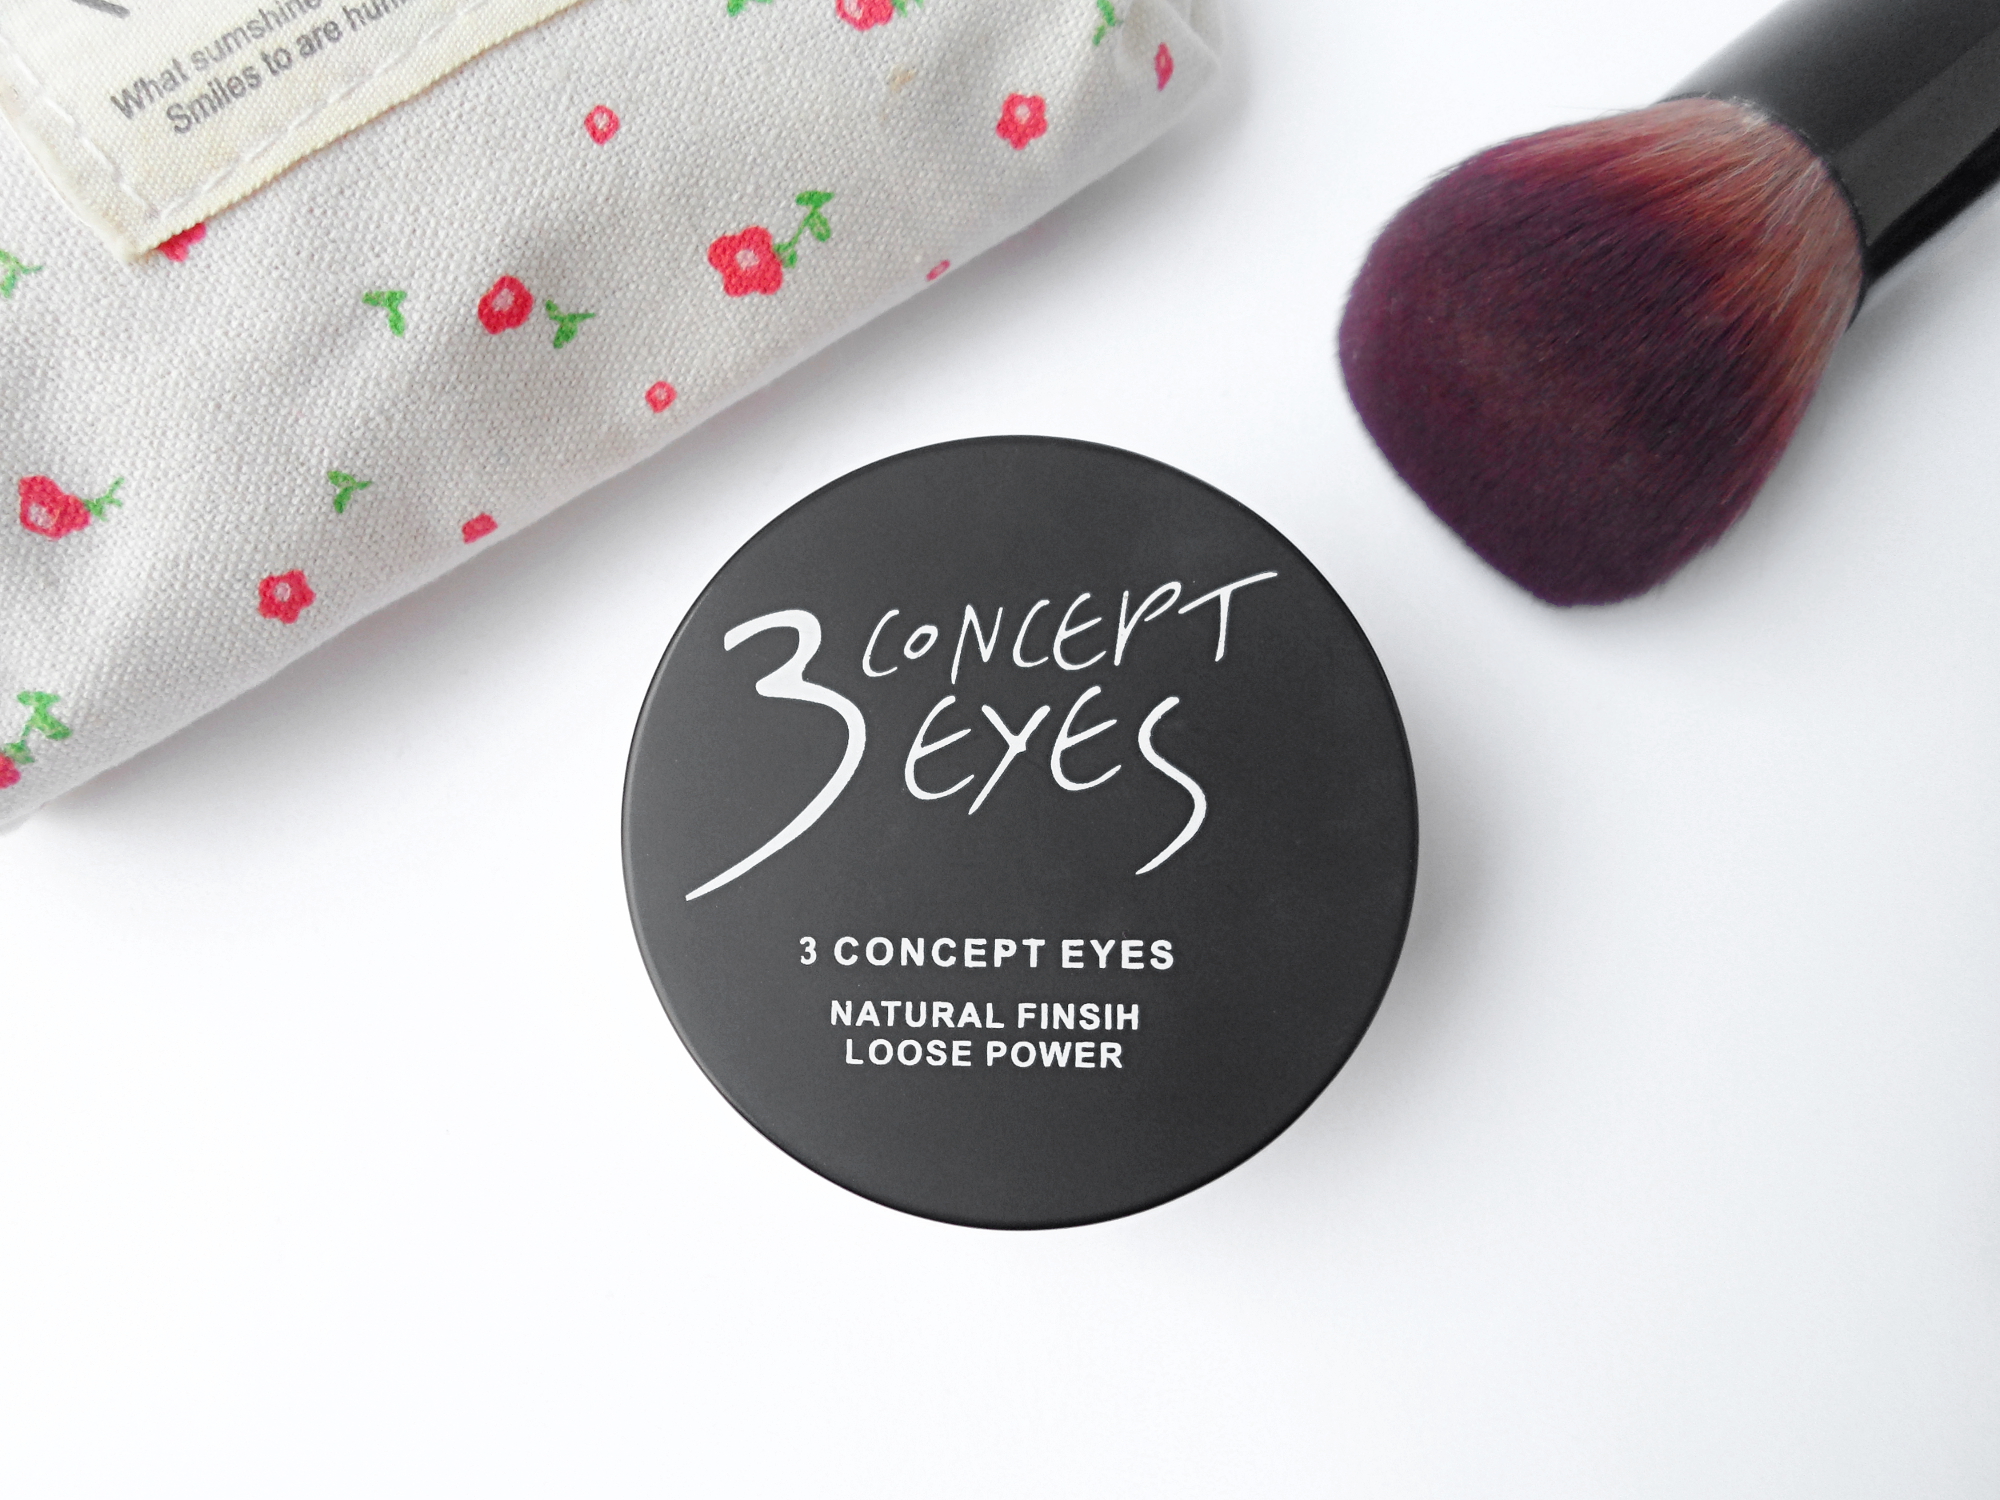 3CE e concept eyes style by nanda makeup review blogger liz breygel swatches  natural translucent powder